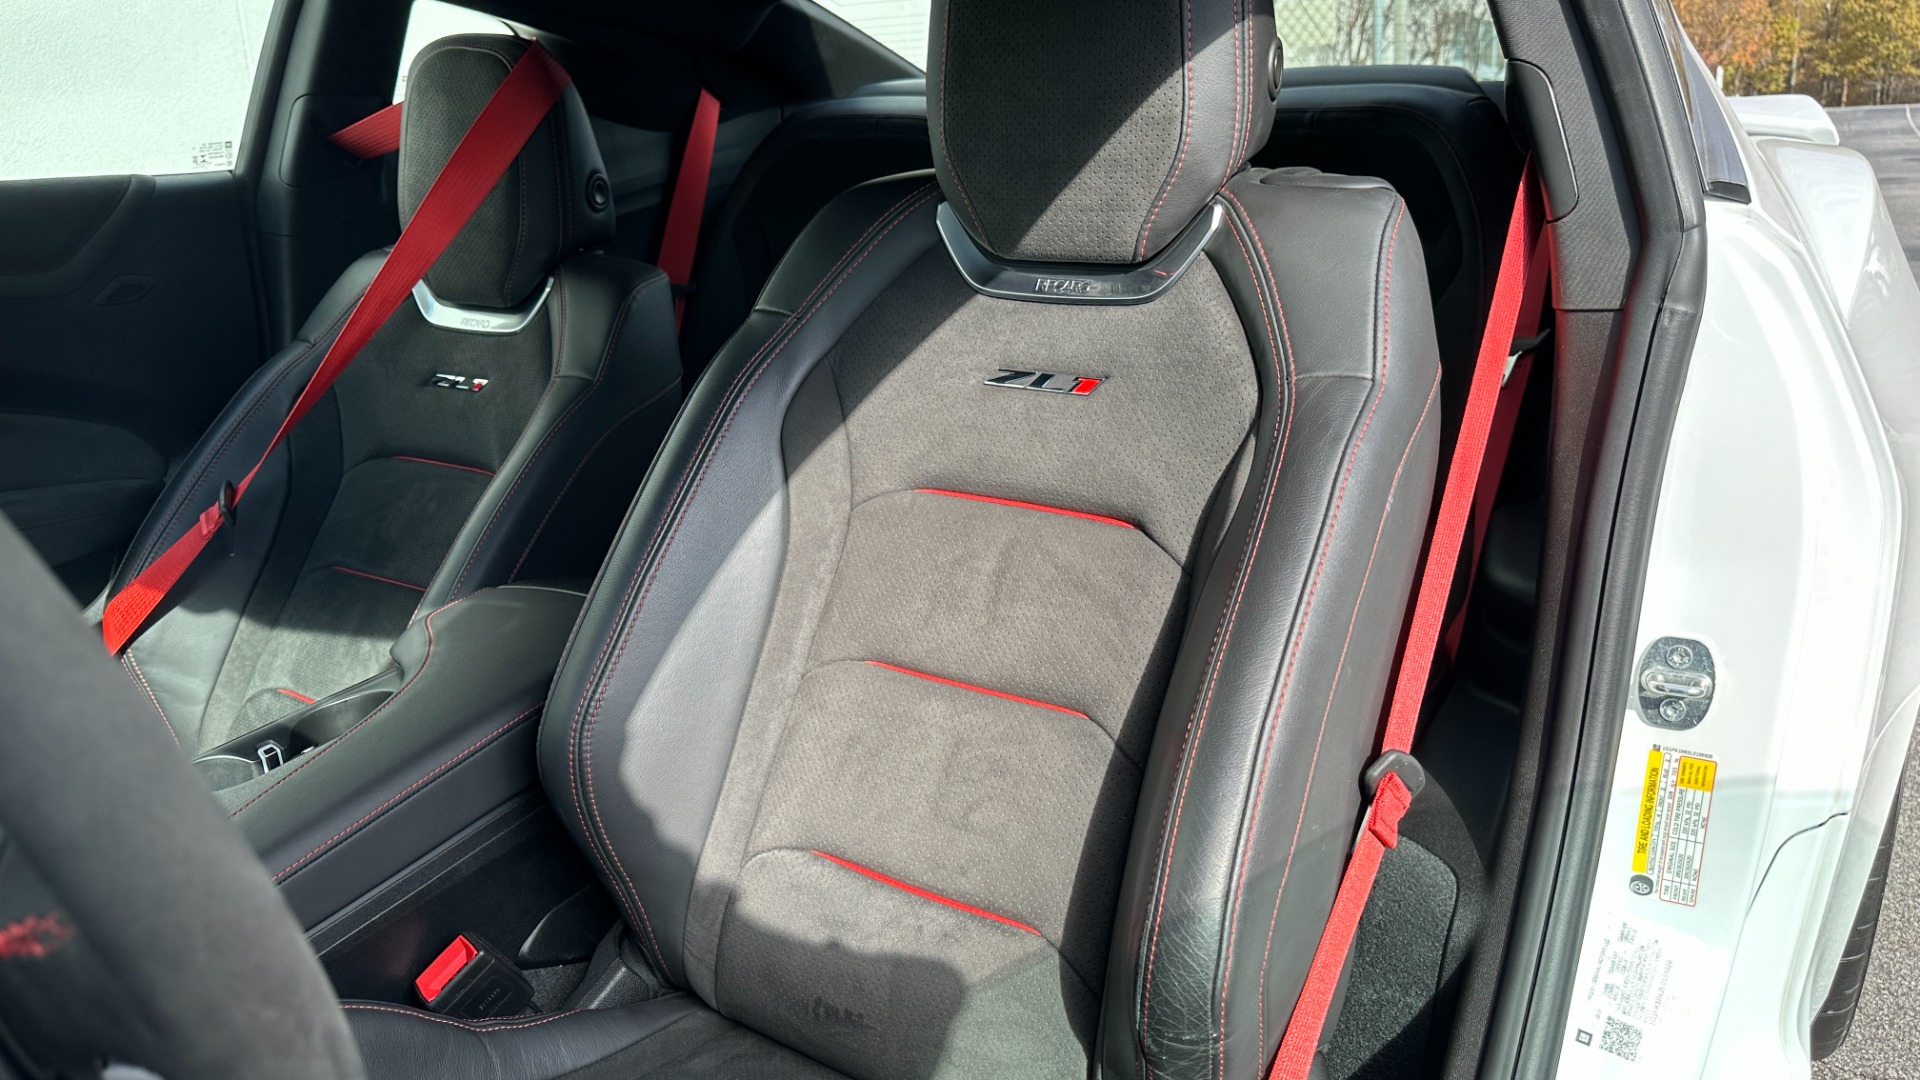 Used 2020 Chevrolet Camaro ZL1 / SUPERCHARGED / CARBON FIBER / RED SEAT BELTS / RECARO SEATING / 10SPD for sale $66,995 at Formula Imports in Charlotte NC 28227 16